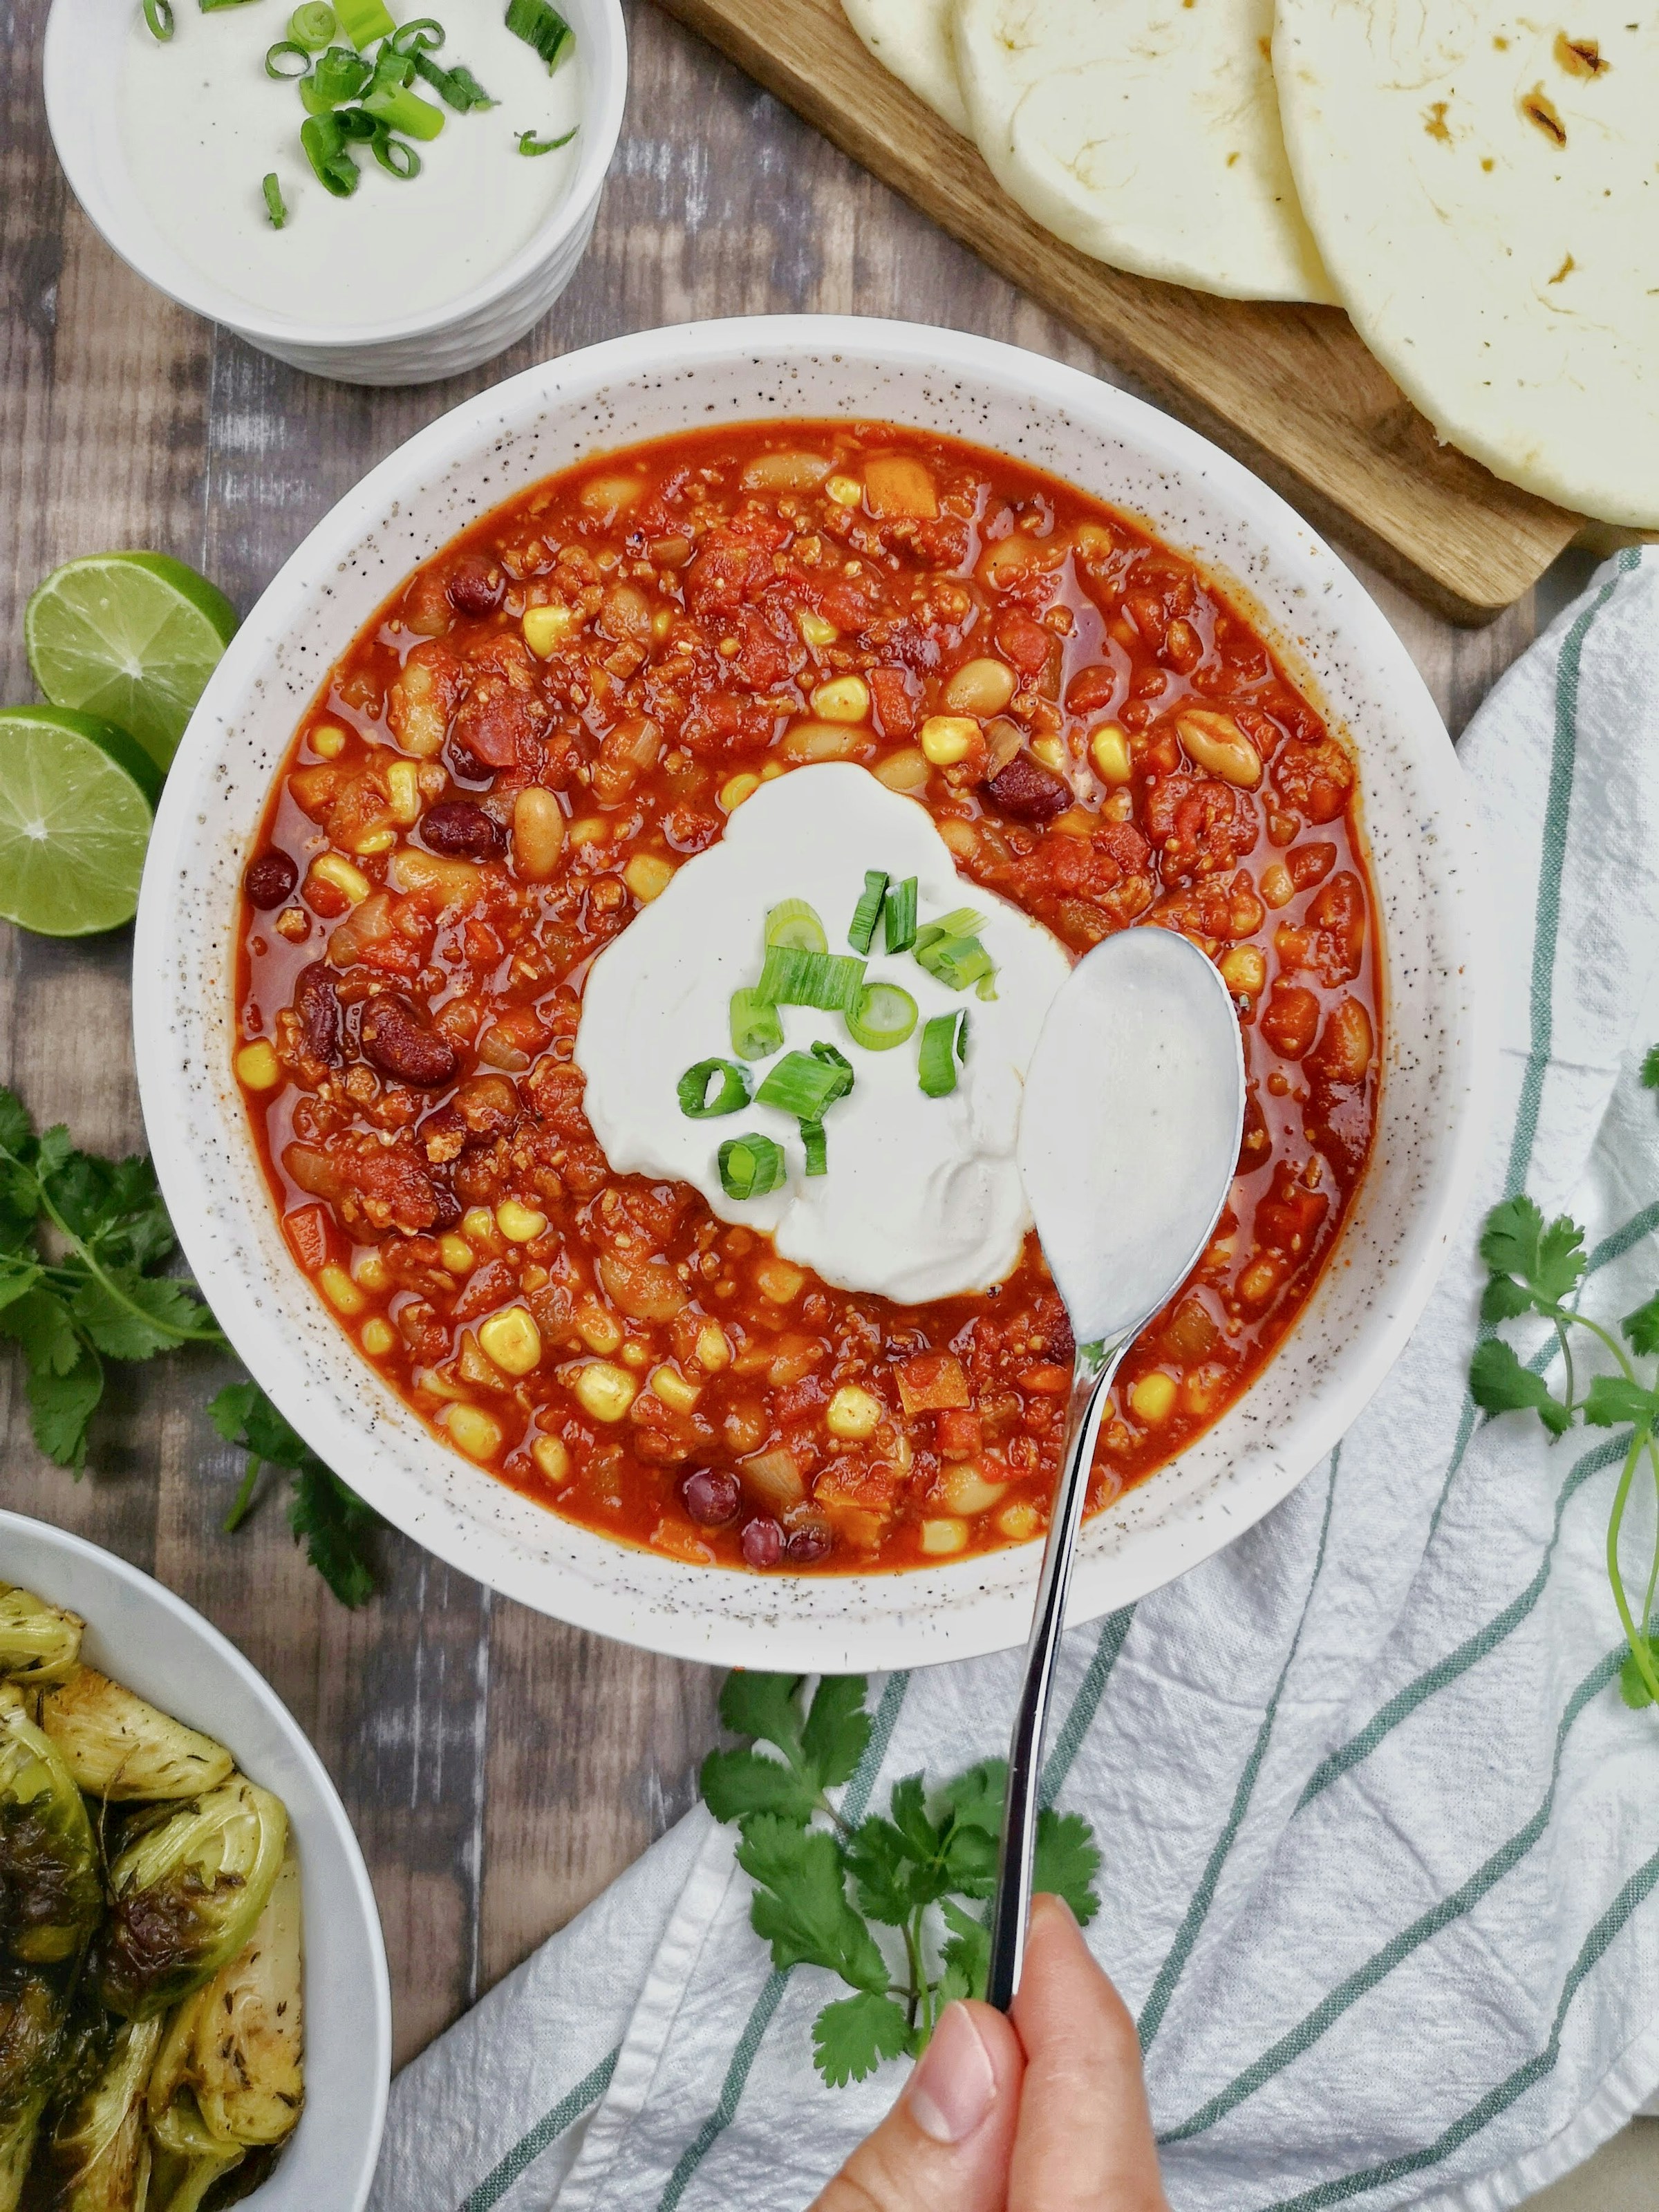 A bowl of chili with sour cream | Source: Unsplash